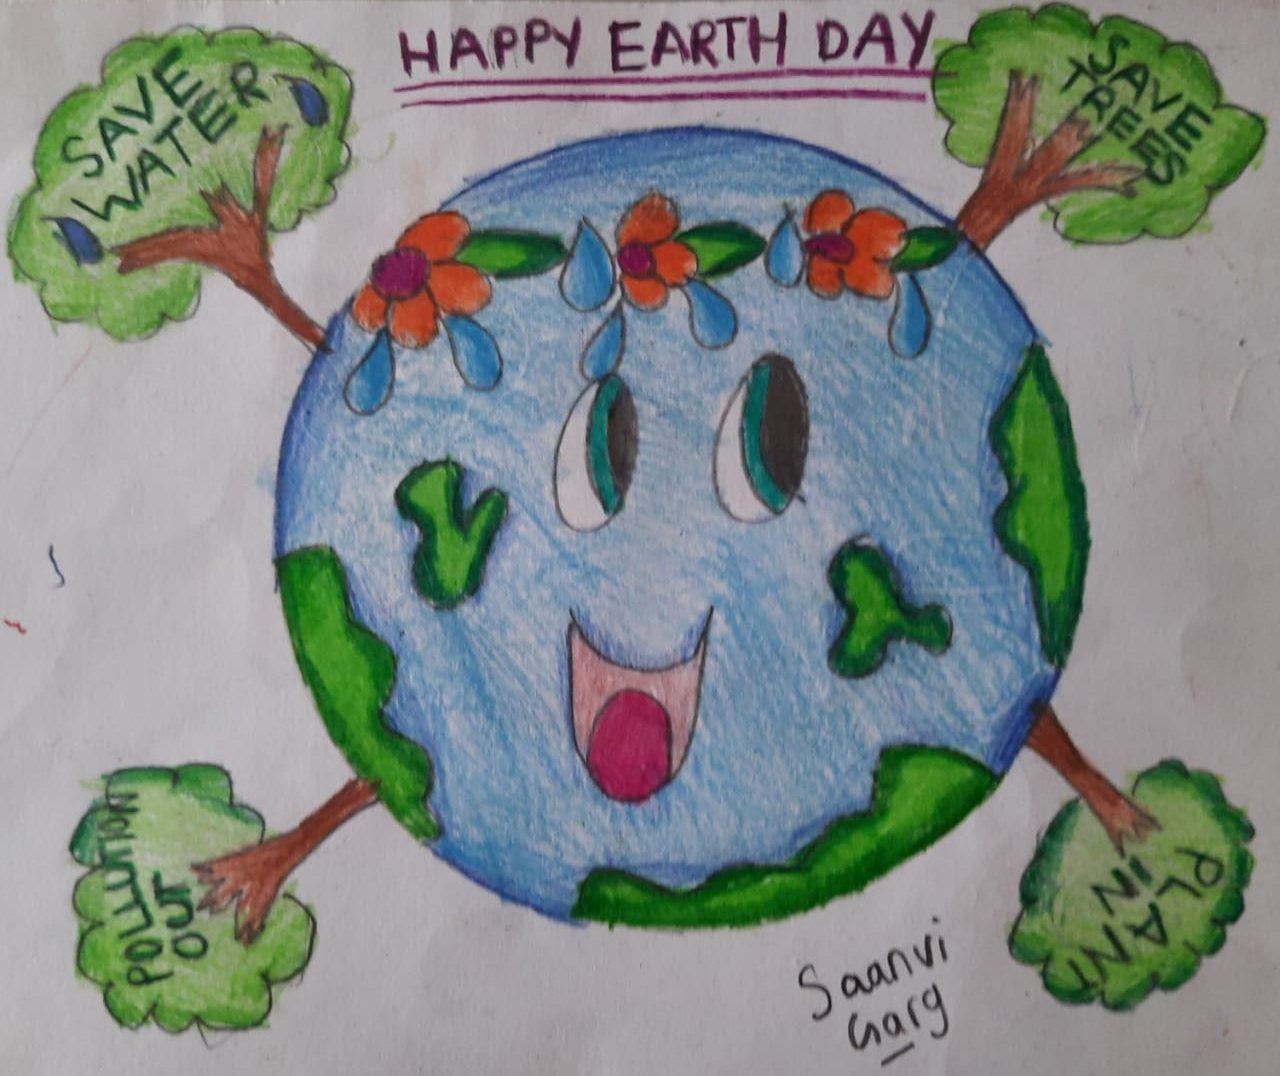 Earth Day Ecology Vector Hd Images, Our Earth Planet Day Ecological  Environmental Pollution Problem Banner Vector Illustration Set For Print  Fabric And Decoration, Earth Day Clipart, Earth, Day PNG Image For Free